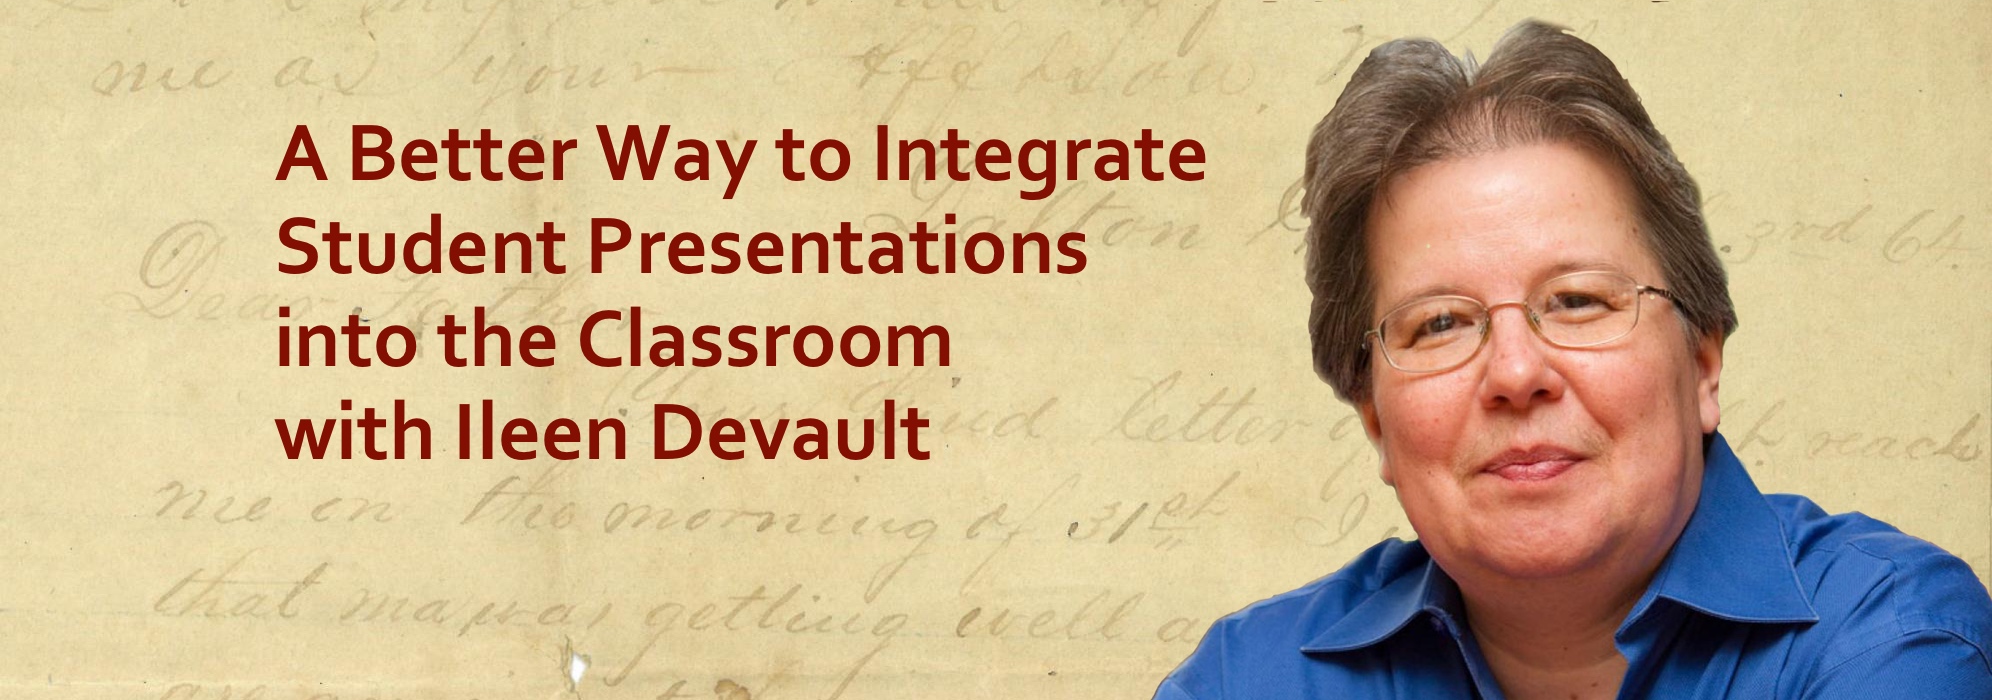 Podcast #63: A Better Way to Integrate Student Presentations into the Classroom with Ileen Devault
                               